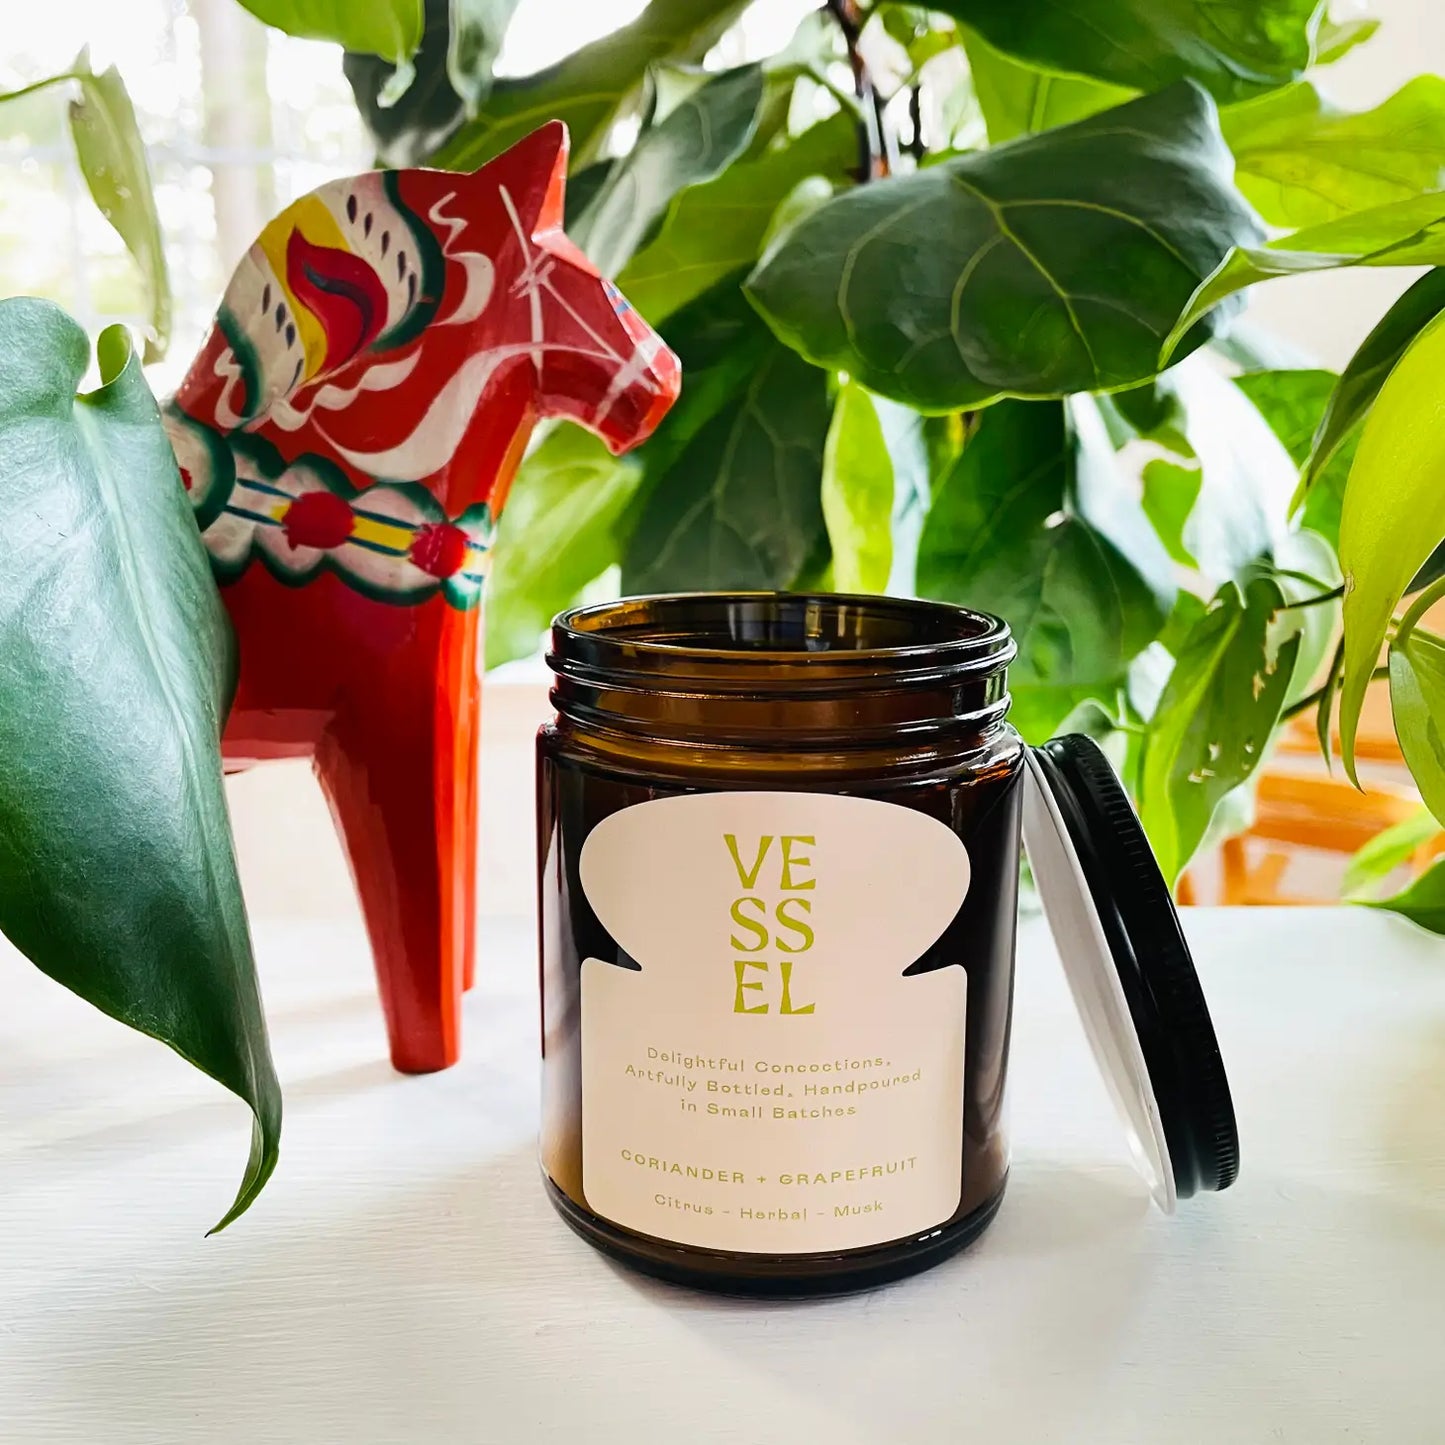 Coriander + Grapefruit Candle by Vessel Candle Co.